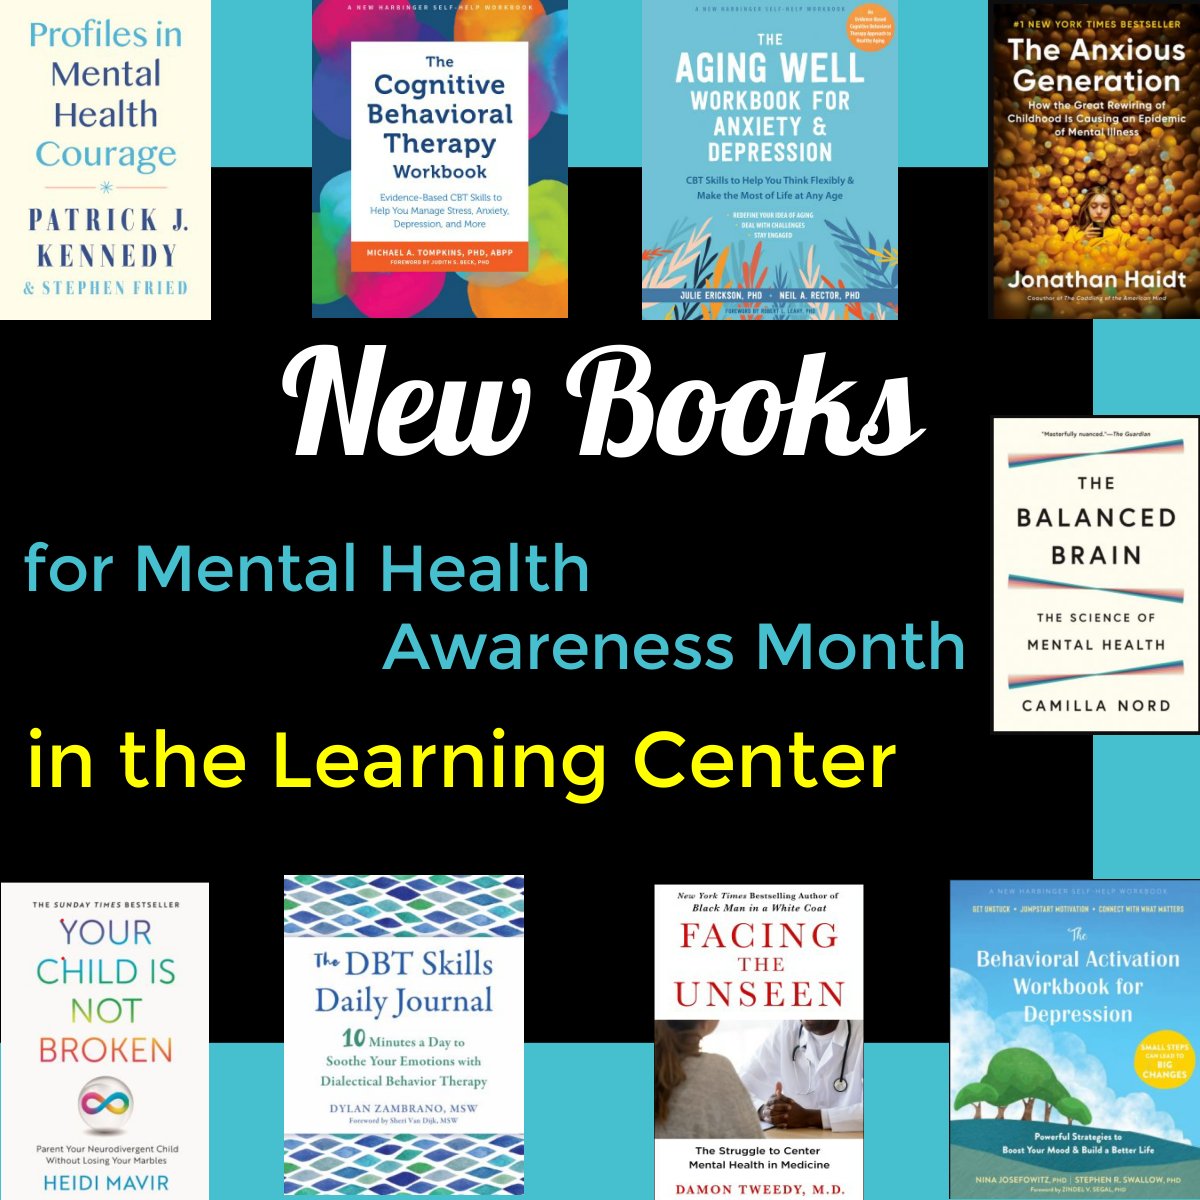 The Chappaqua Library recognizes
Mental Health Awareness month with new books, a
display case featuring Mental Health, and a book
display. @PJK4brainhealth @JonHaidt @camillalnord @DamonTweedyMD